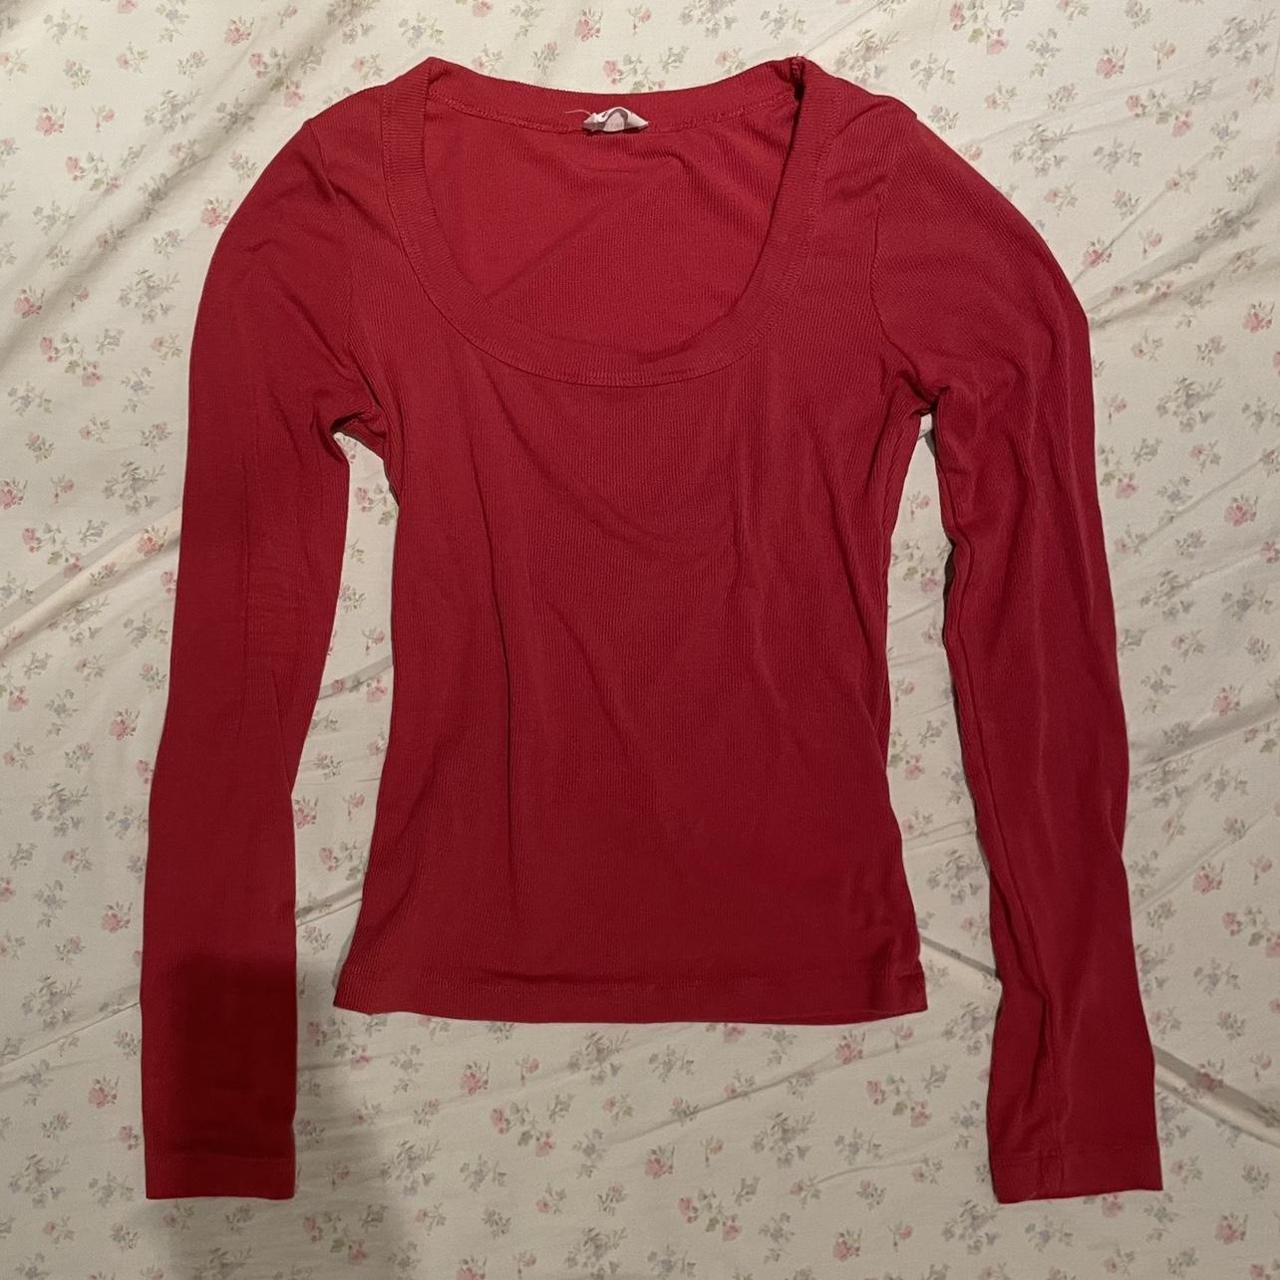 Cotton On Women's Red Shirt (2)